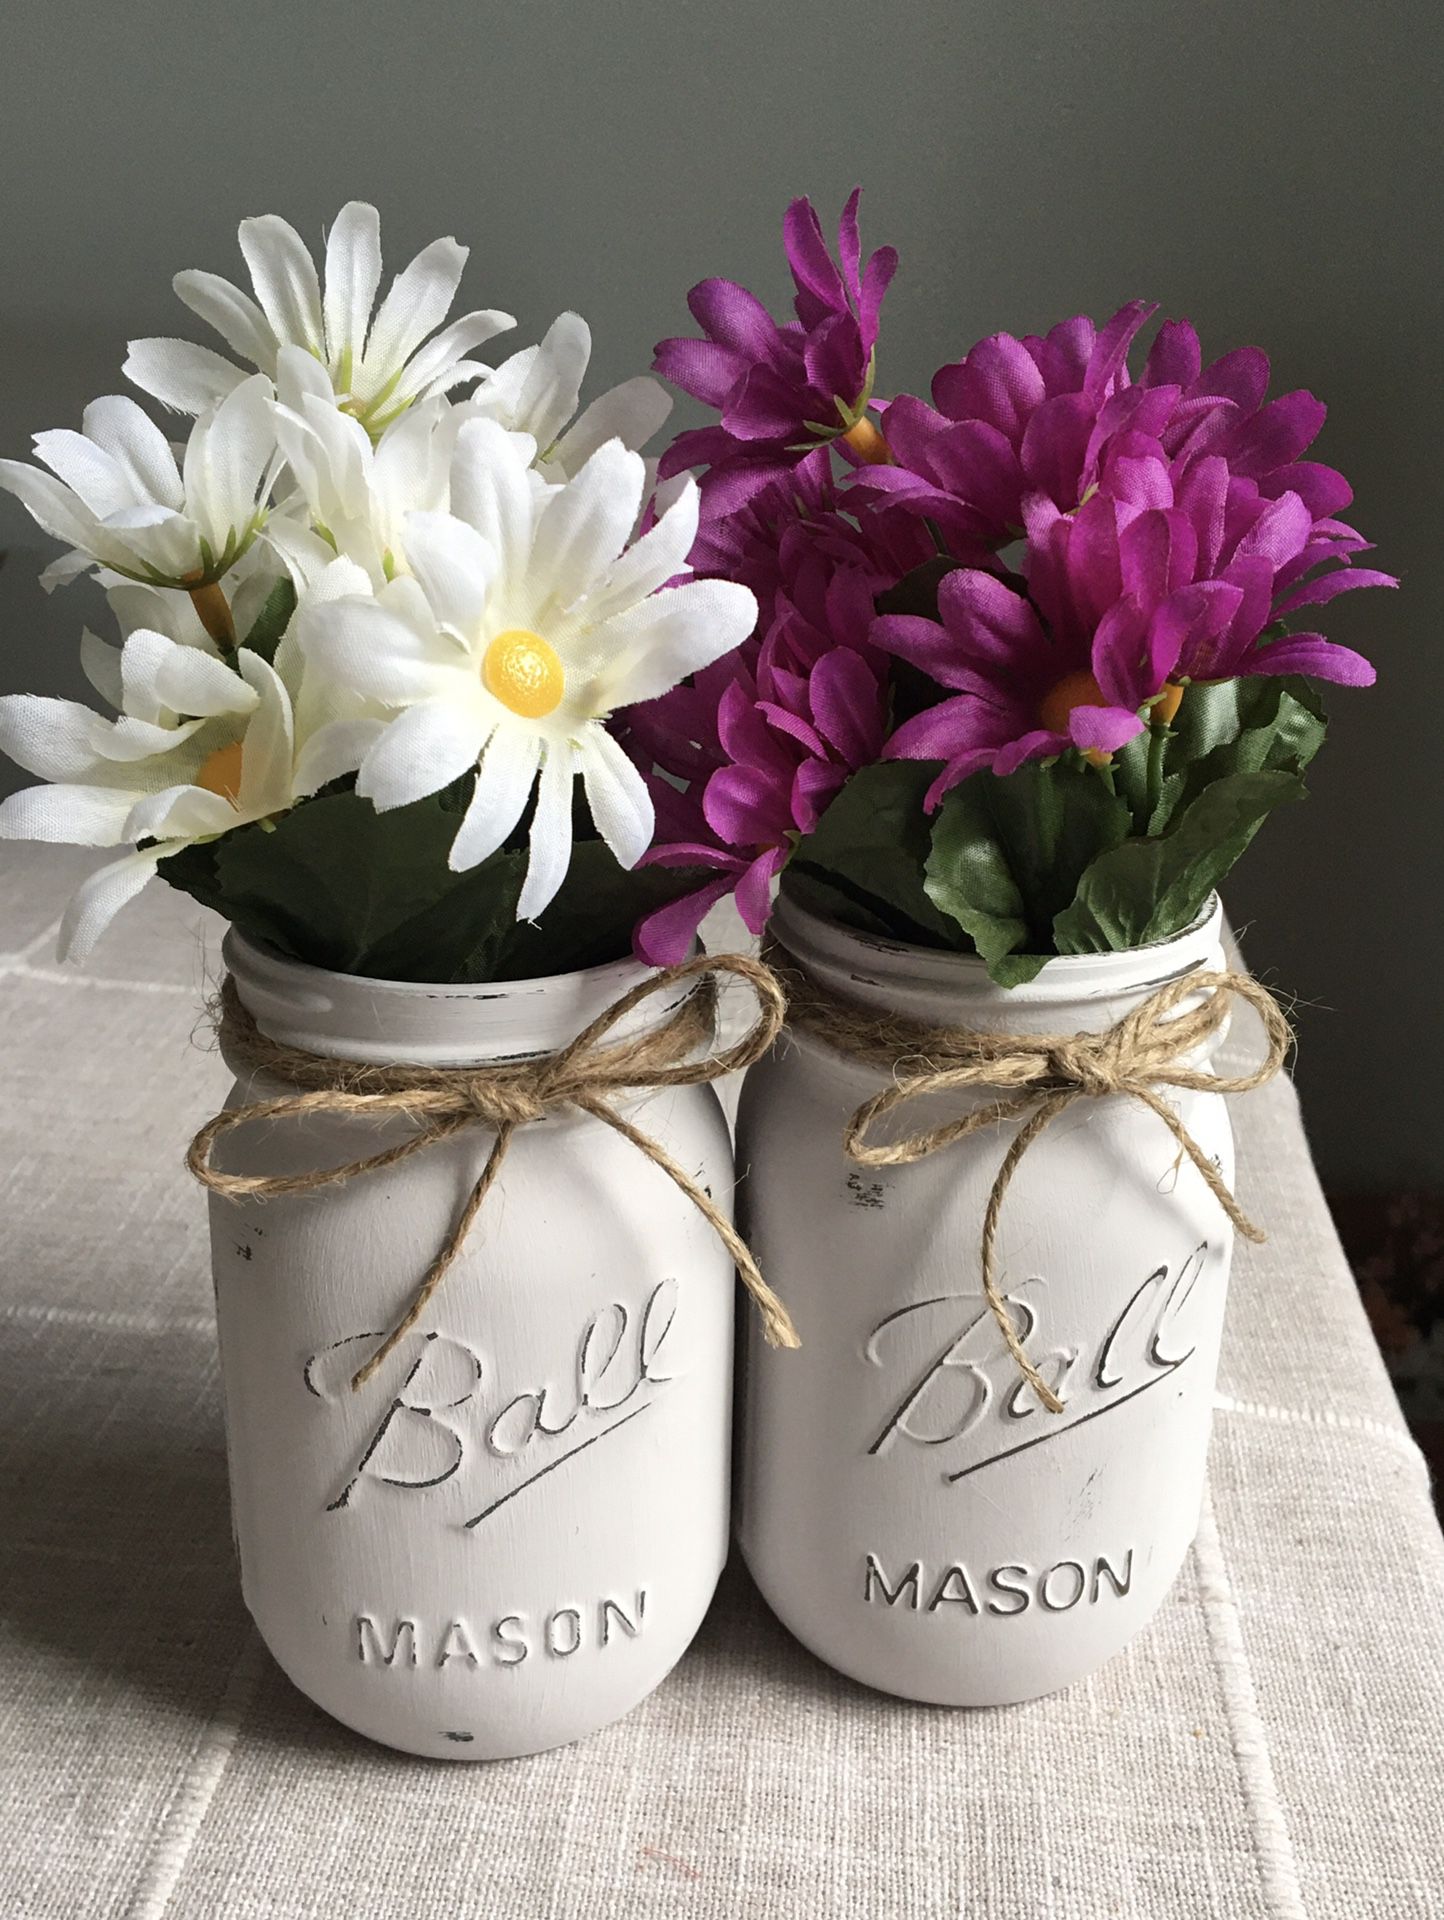 Distressed mason jar vases with flowers included!! Jar/flower choices shown in photos $12 for both